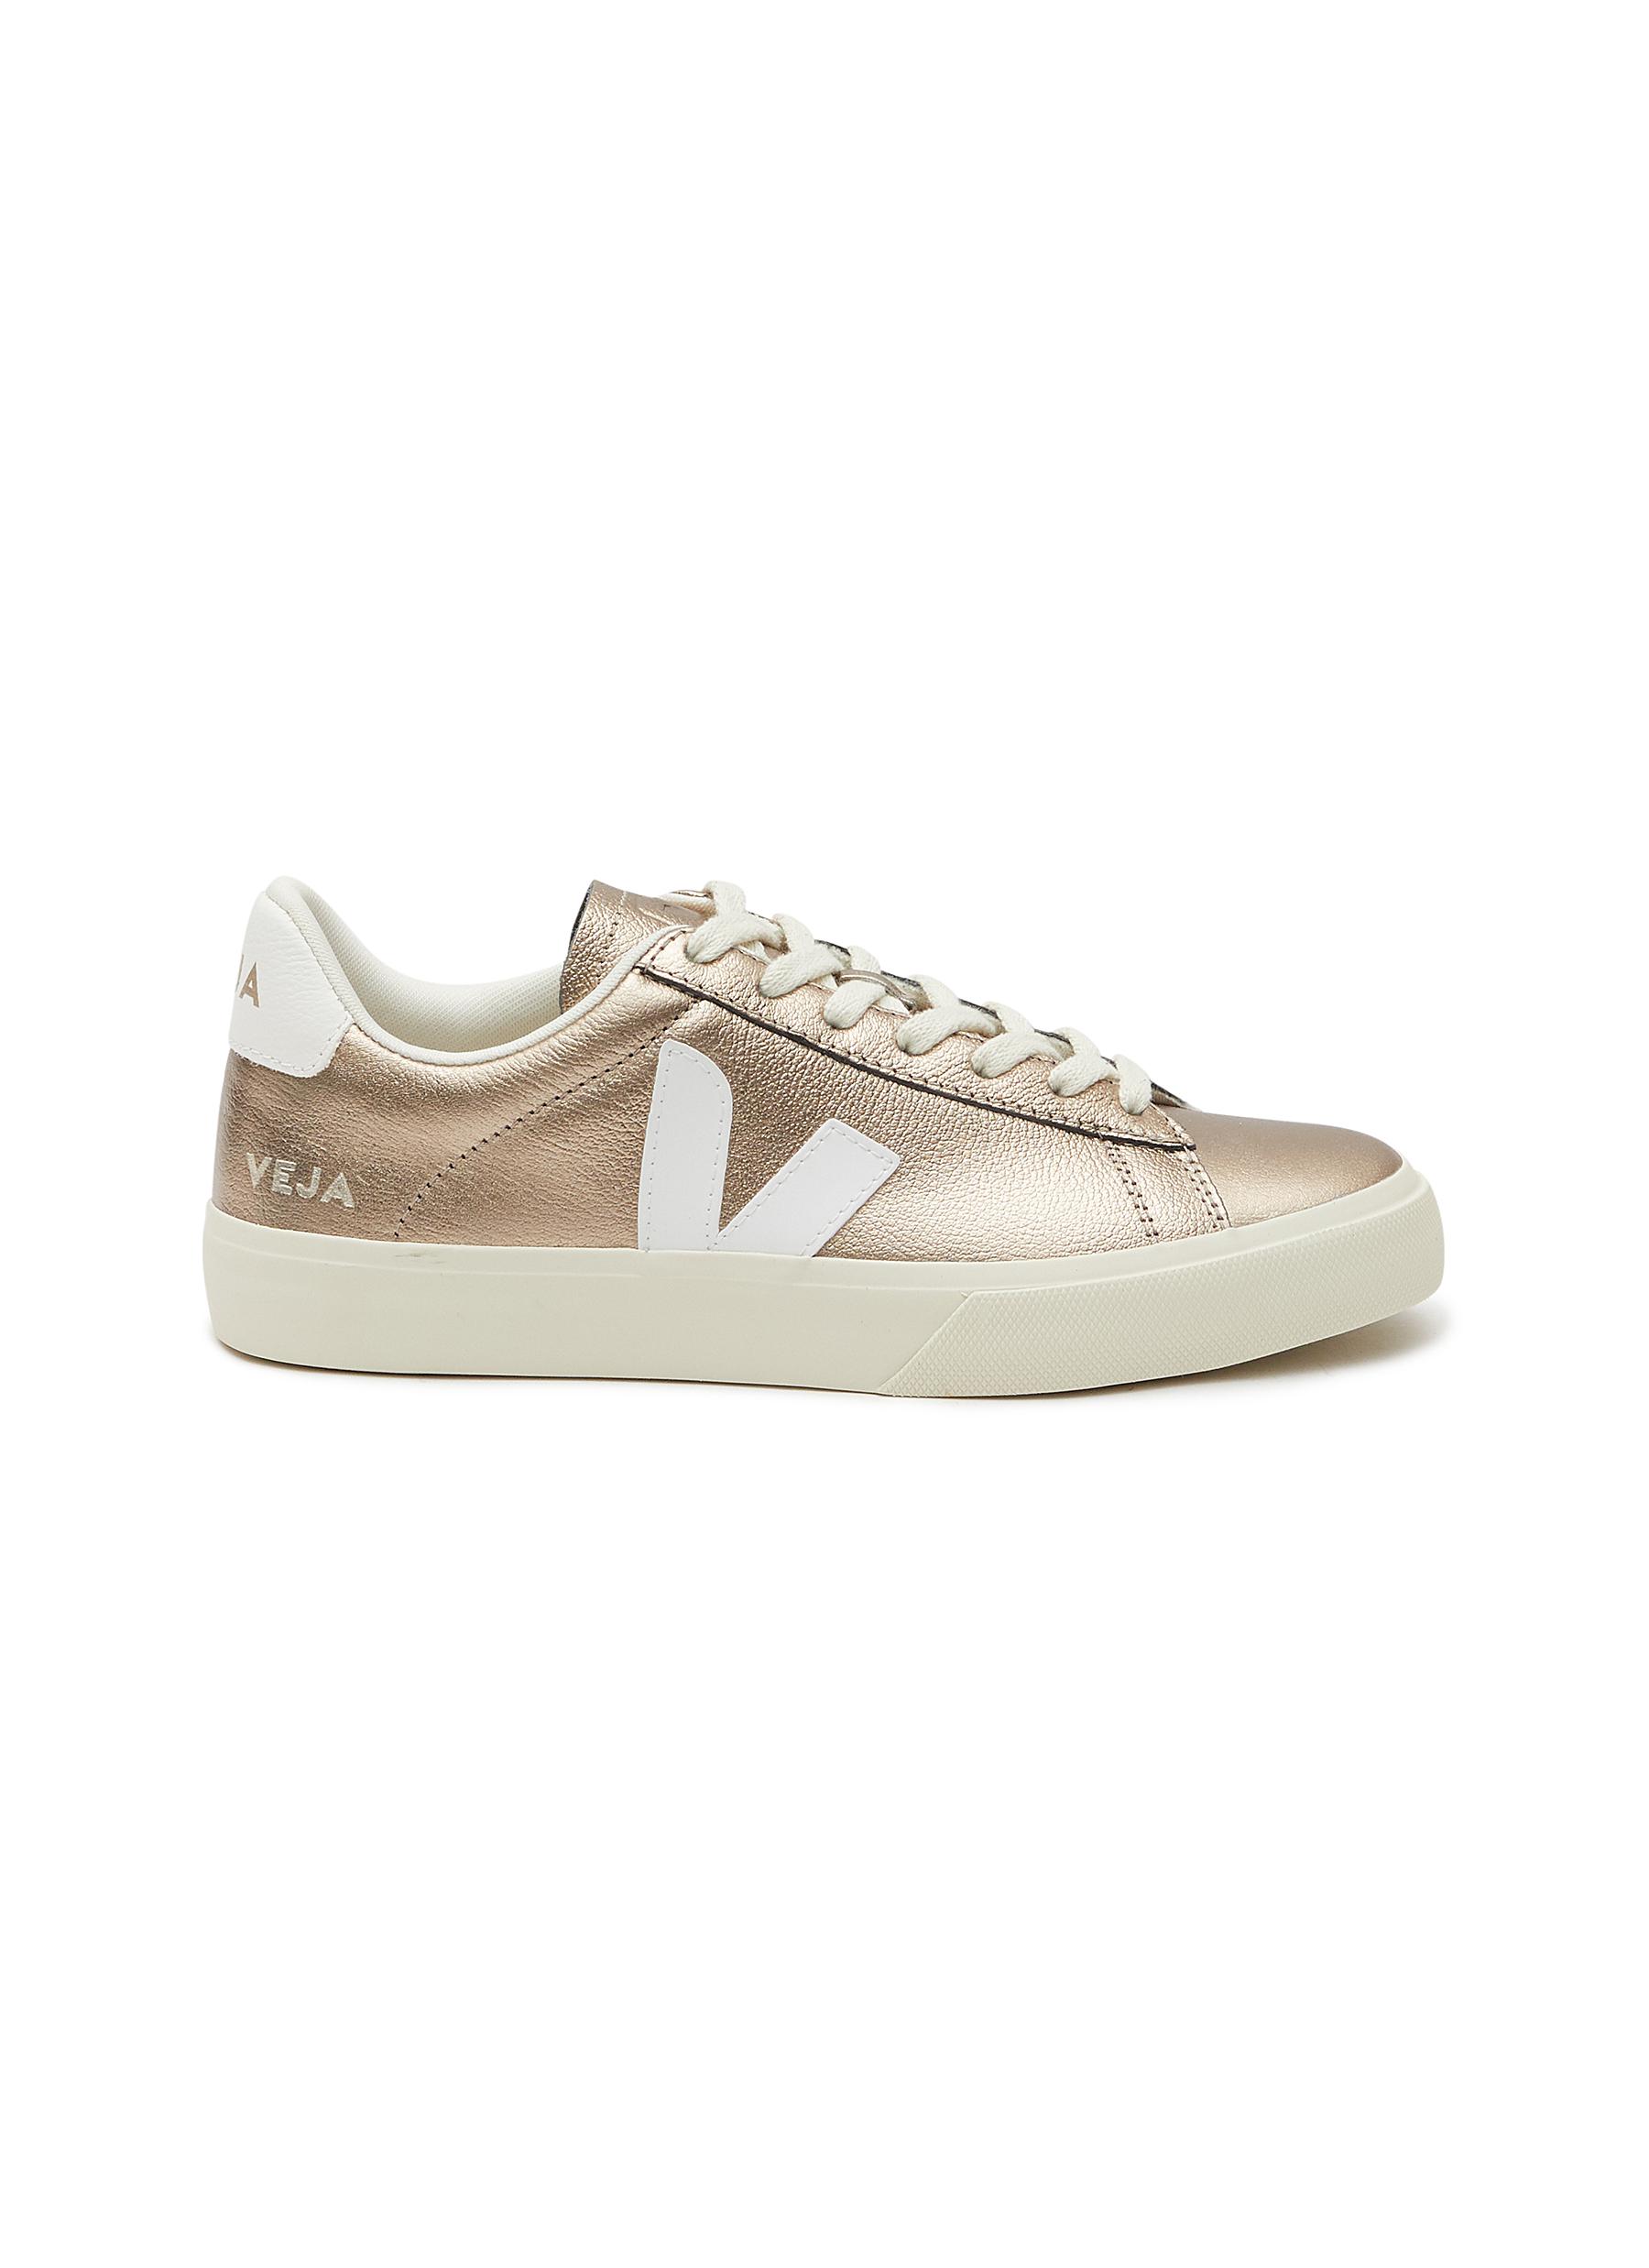 'Campo' Leather Low-Top Lace-Up Sneakers